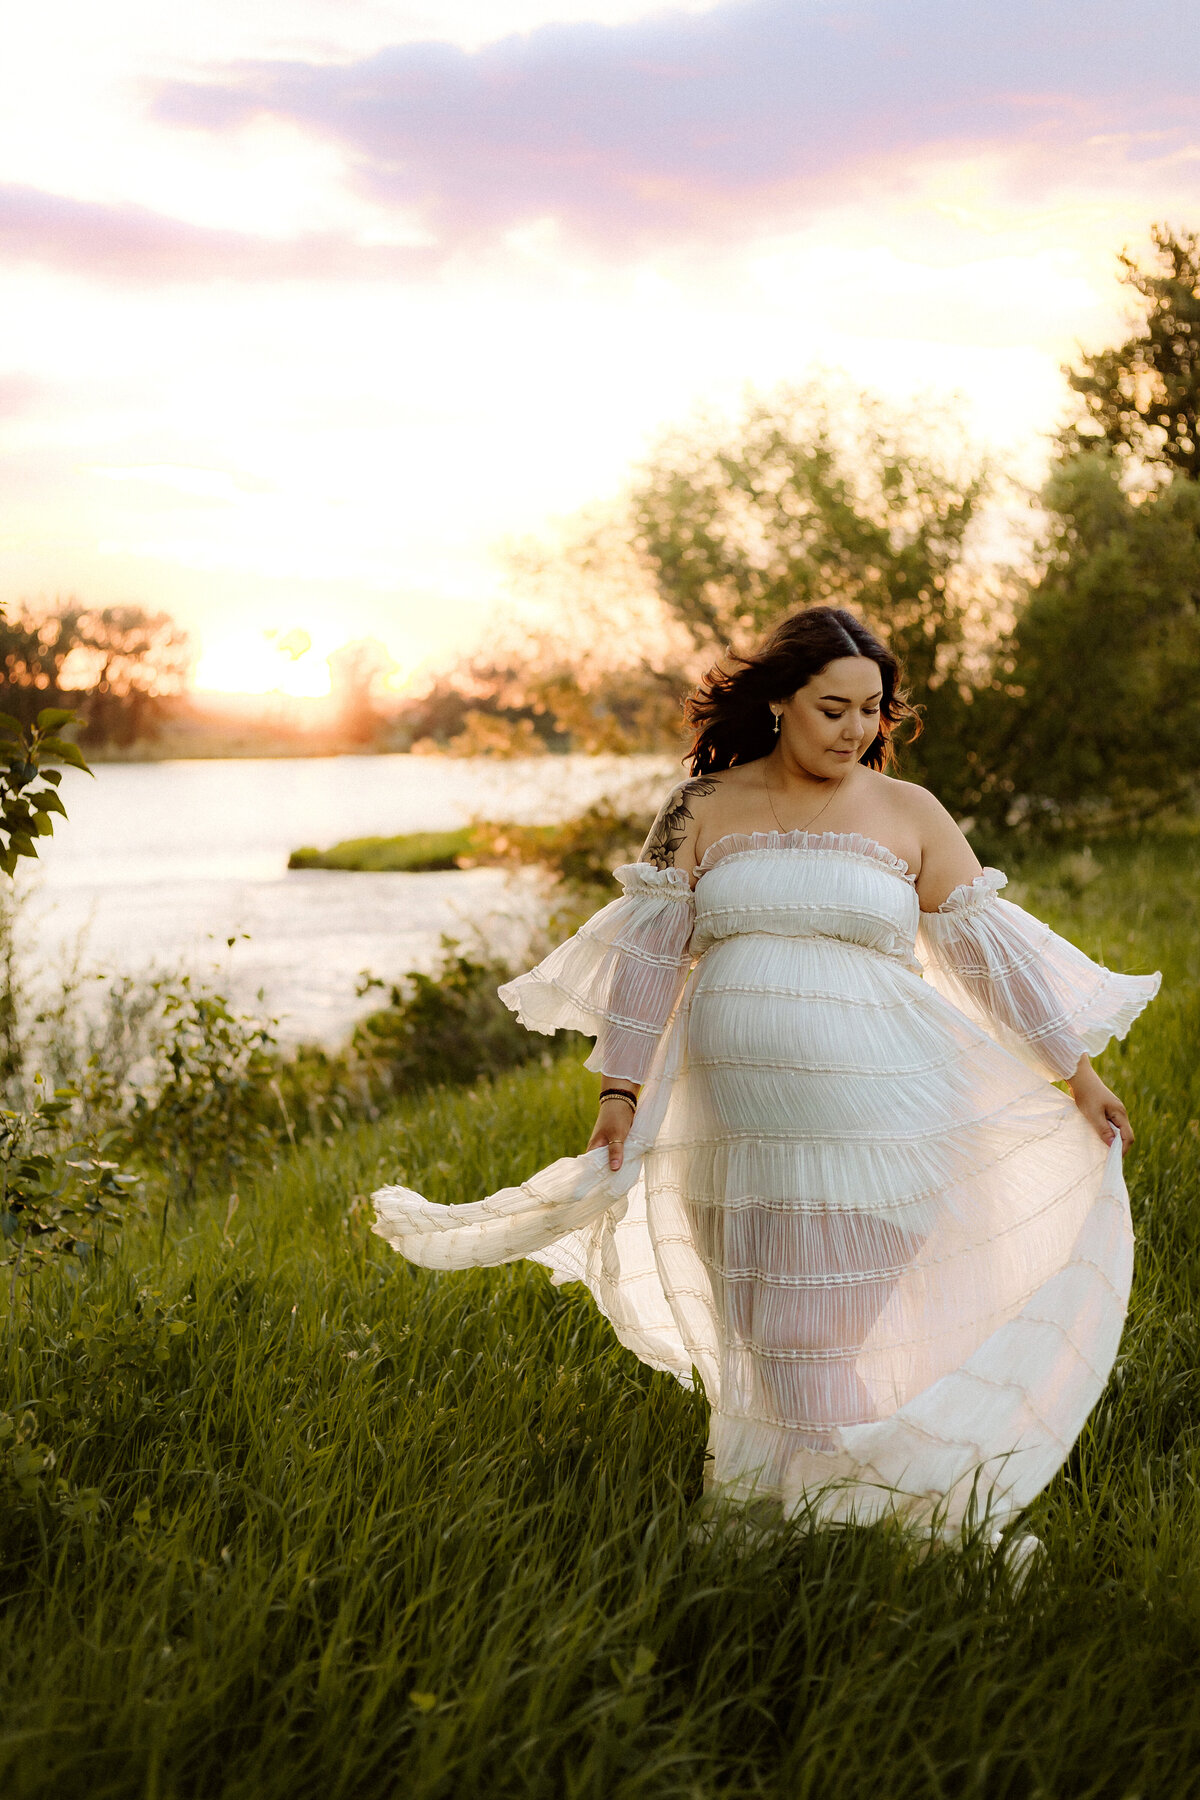 My dramatic maternity photography serves as an ode to the beauty of motherhood. Let's create bold and emotionally charged images that tell your story